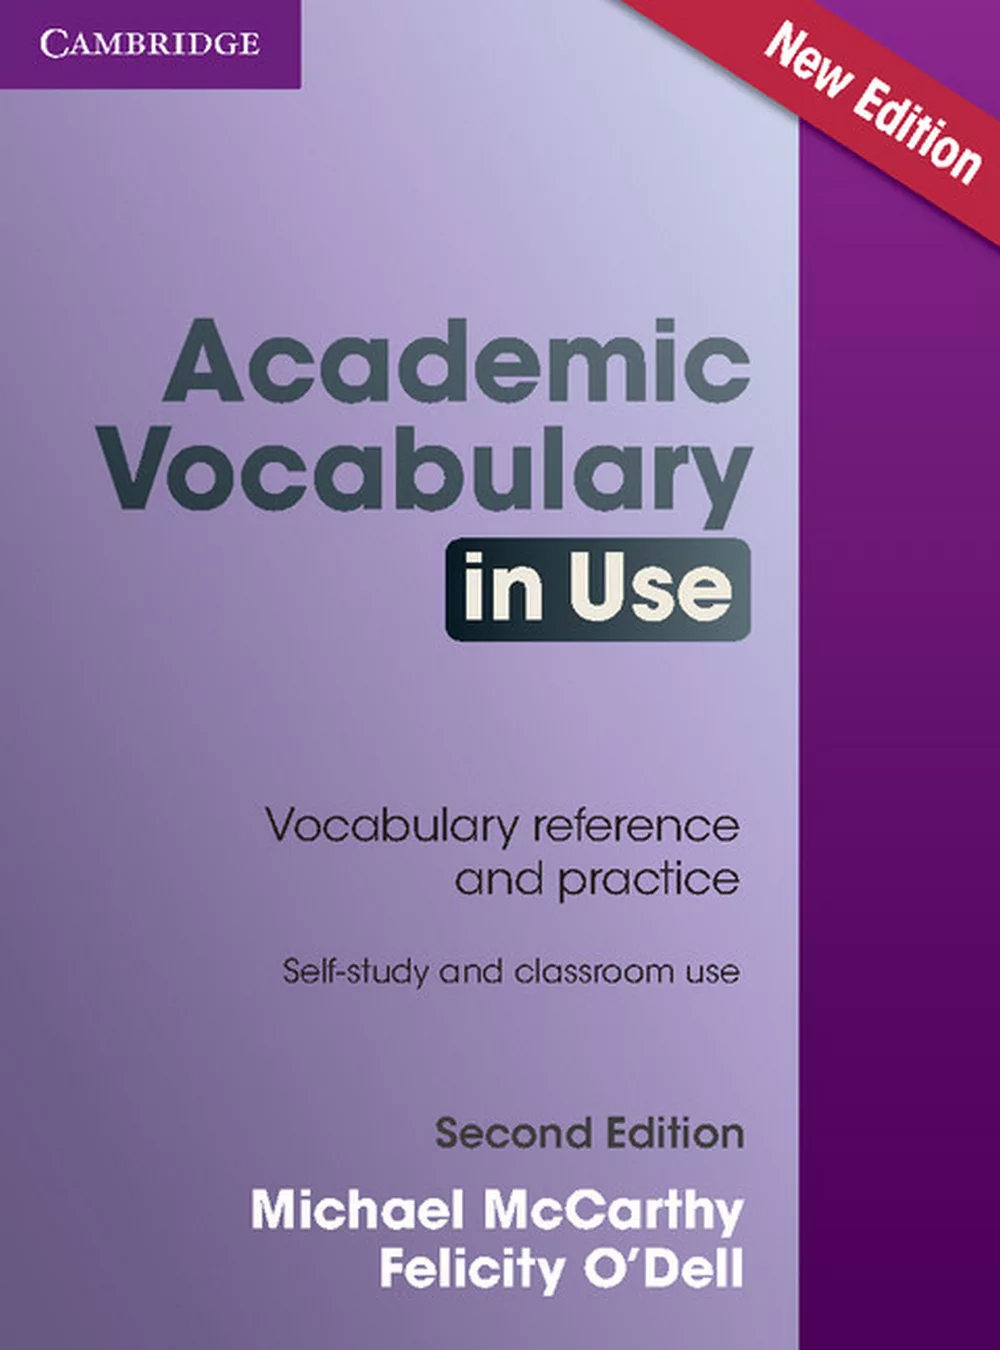 Academic Vocabulary in Use: Vocabulary Reference and Practice: Self-study and Classroom Use